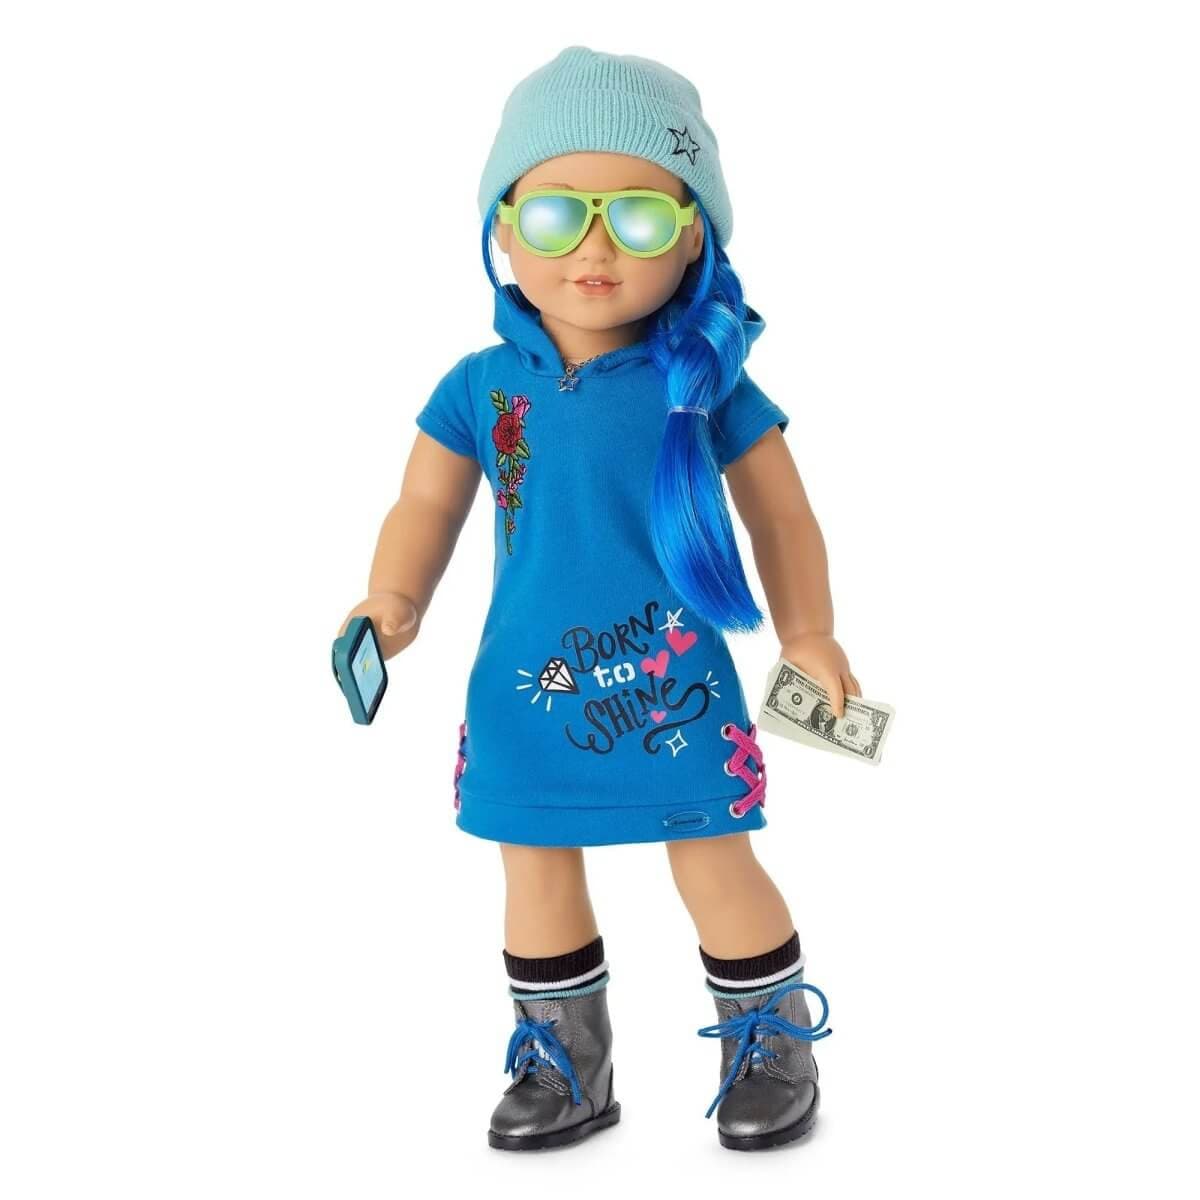 American Girl Chic And Stylish Accessories for 18-inch Dolls - Simon's Collectibles